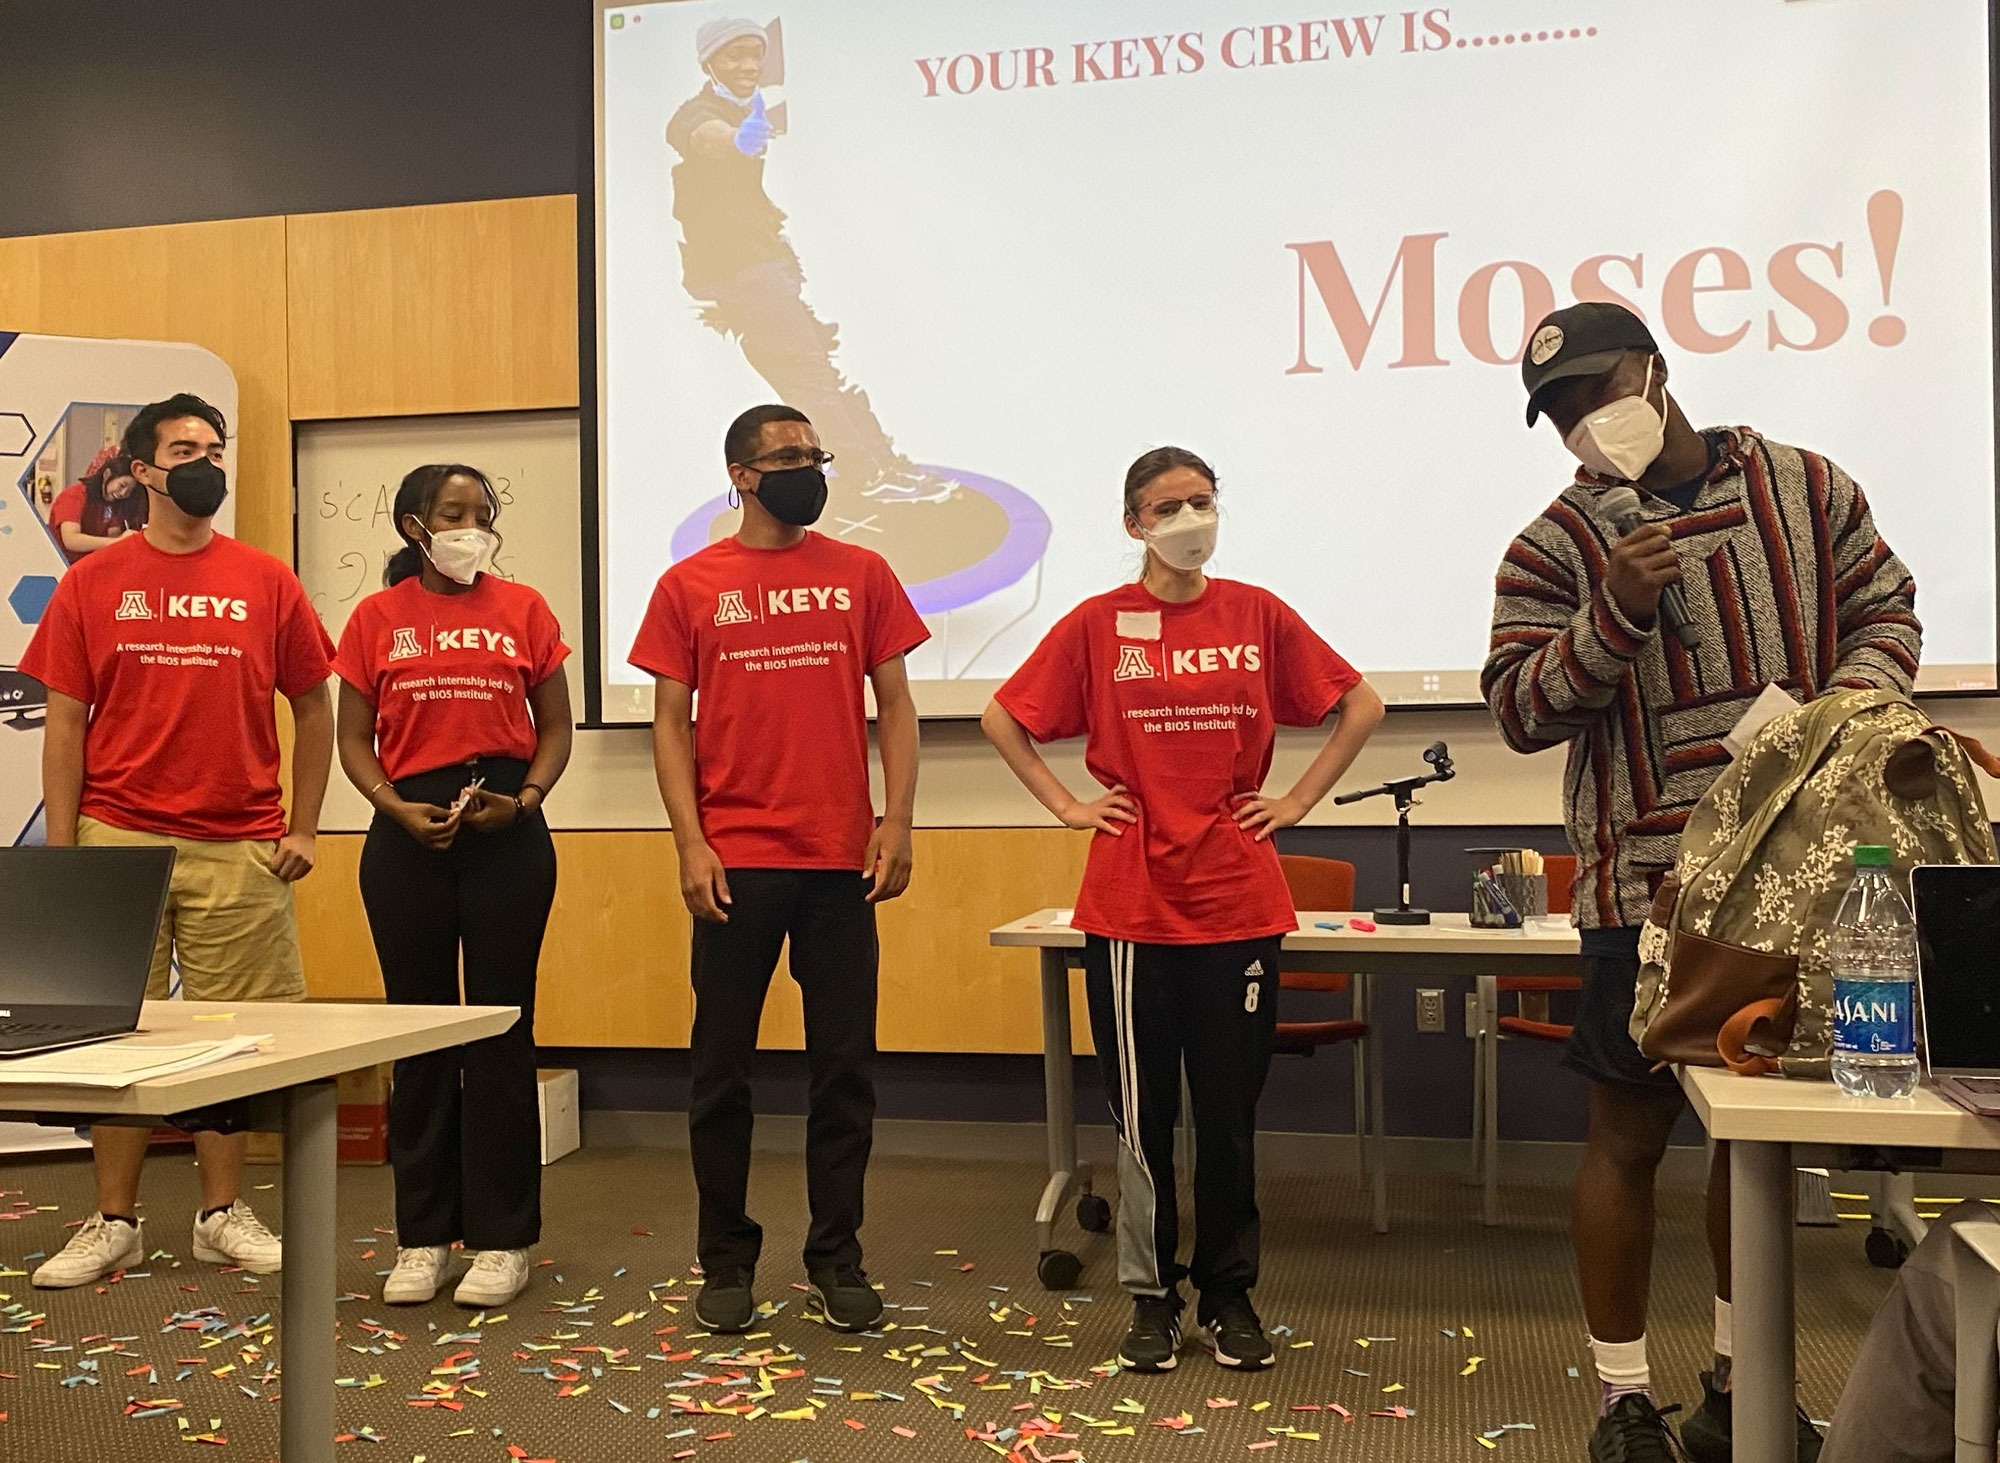 Young man with a microphone stands in front of a room with several students wearing red KEYS Research Internship shirts. All are wearing masks.